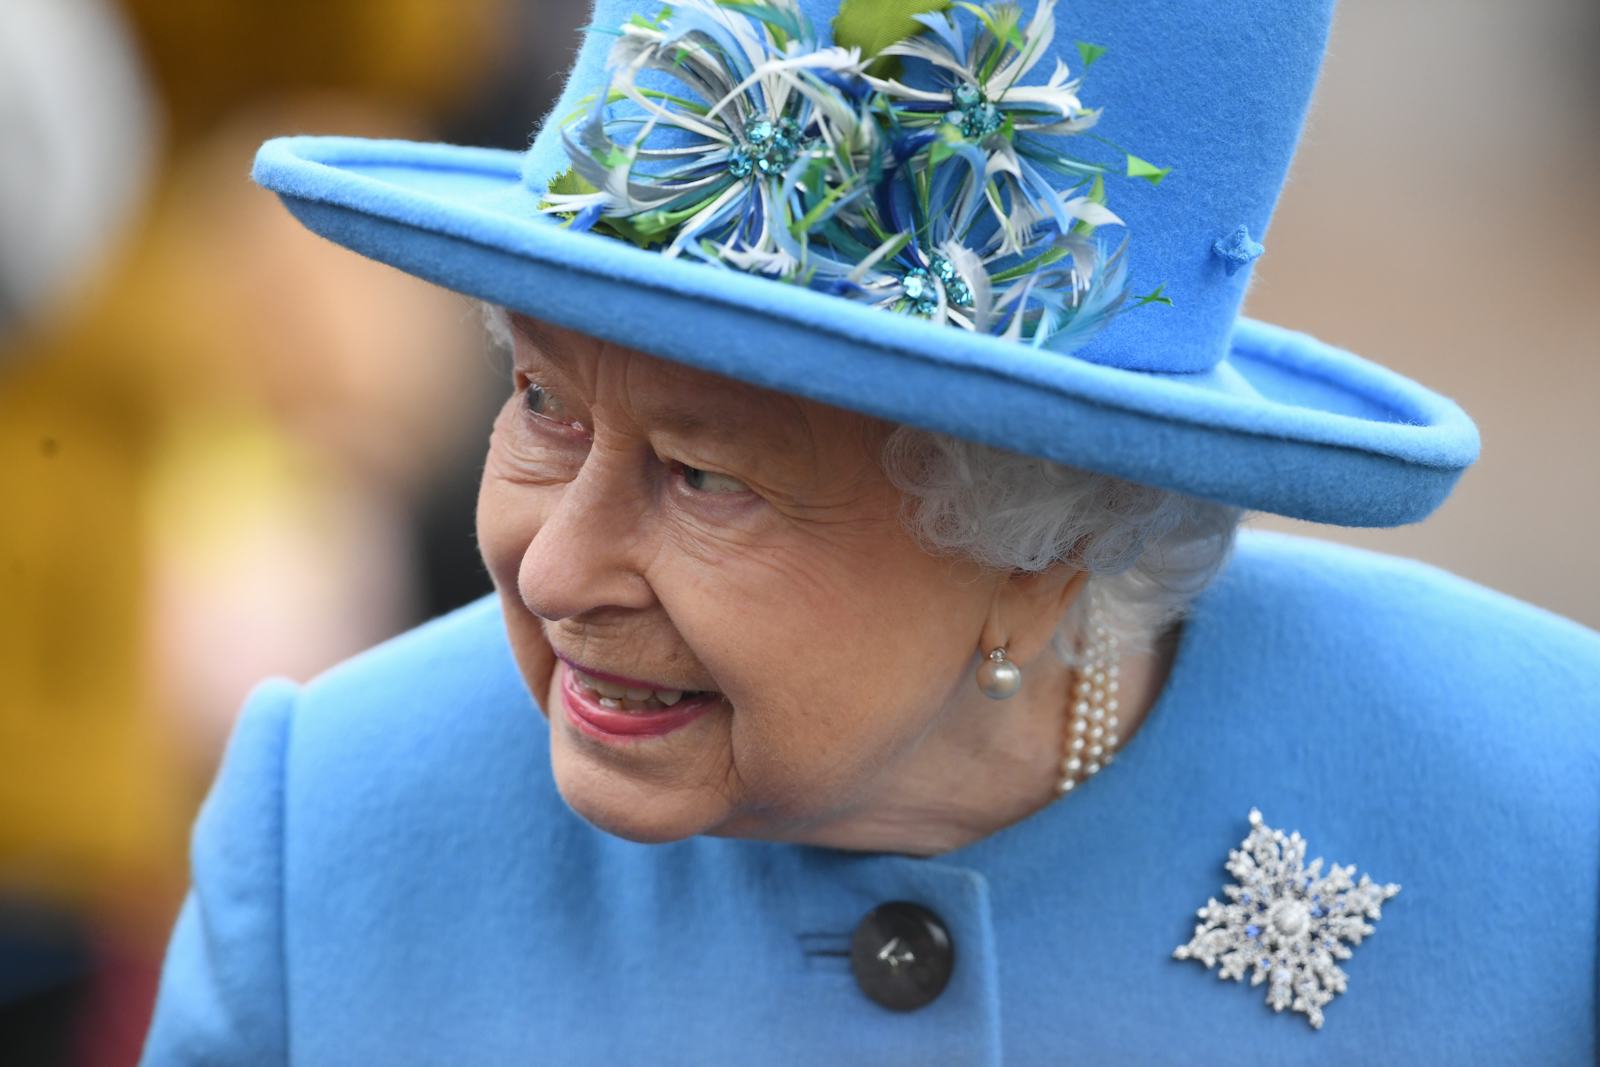 The Queen's Snowflake Brooch May Be A Sign Of Support For Meghan Markle